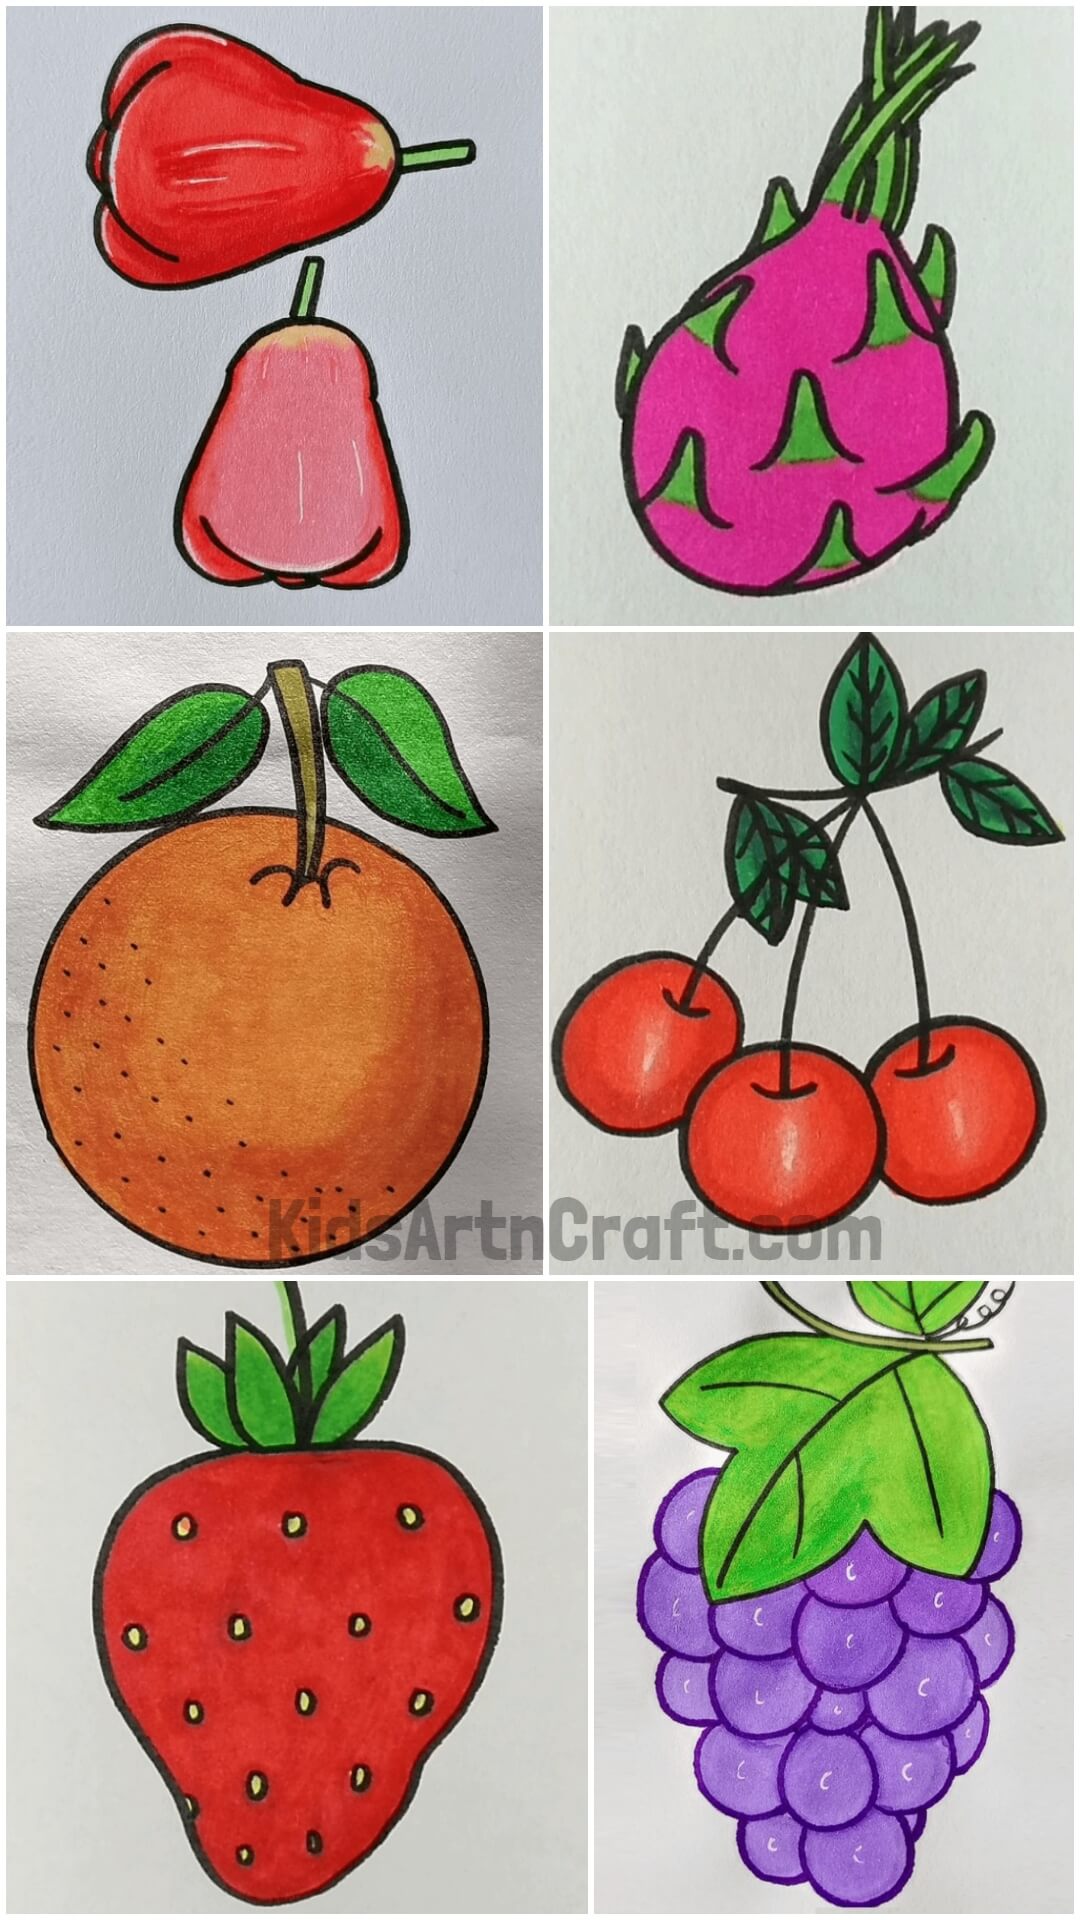 Let's Learn, Draw And Eat Fruits Together